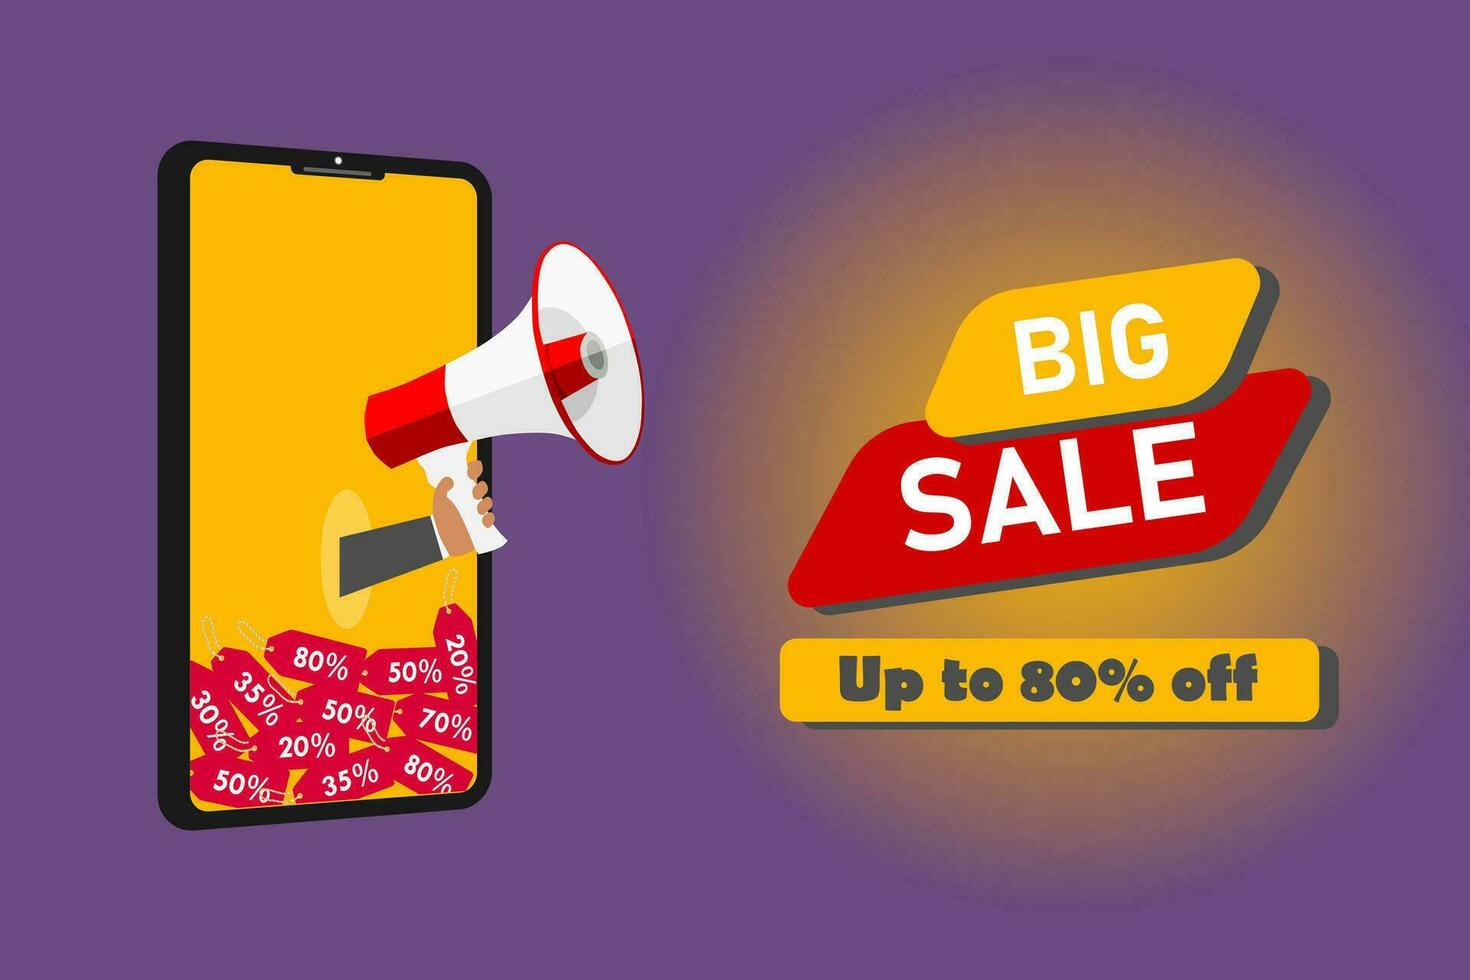 Big sale discount background with a smart phone and megaphone. Discount promotion layout banner template design. Vector illustration.